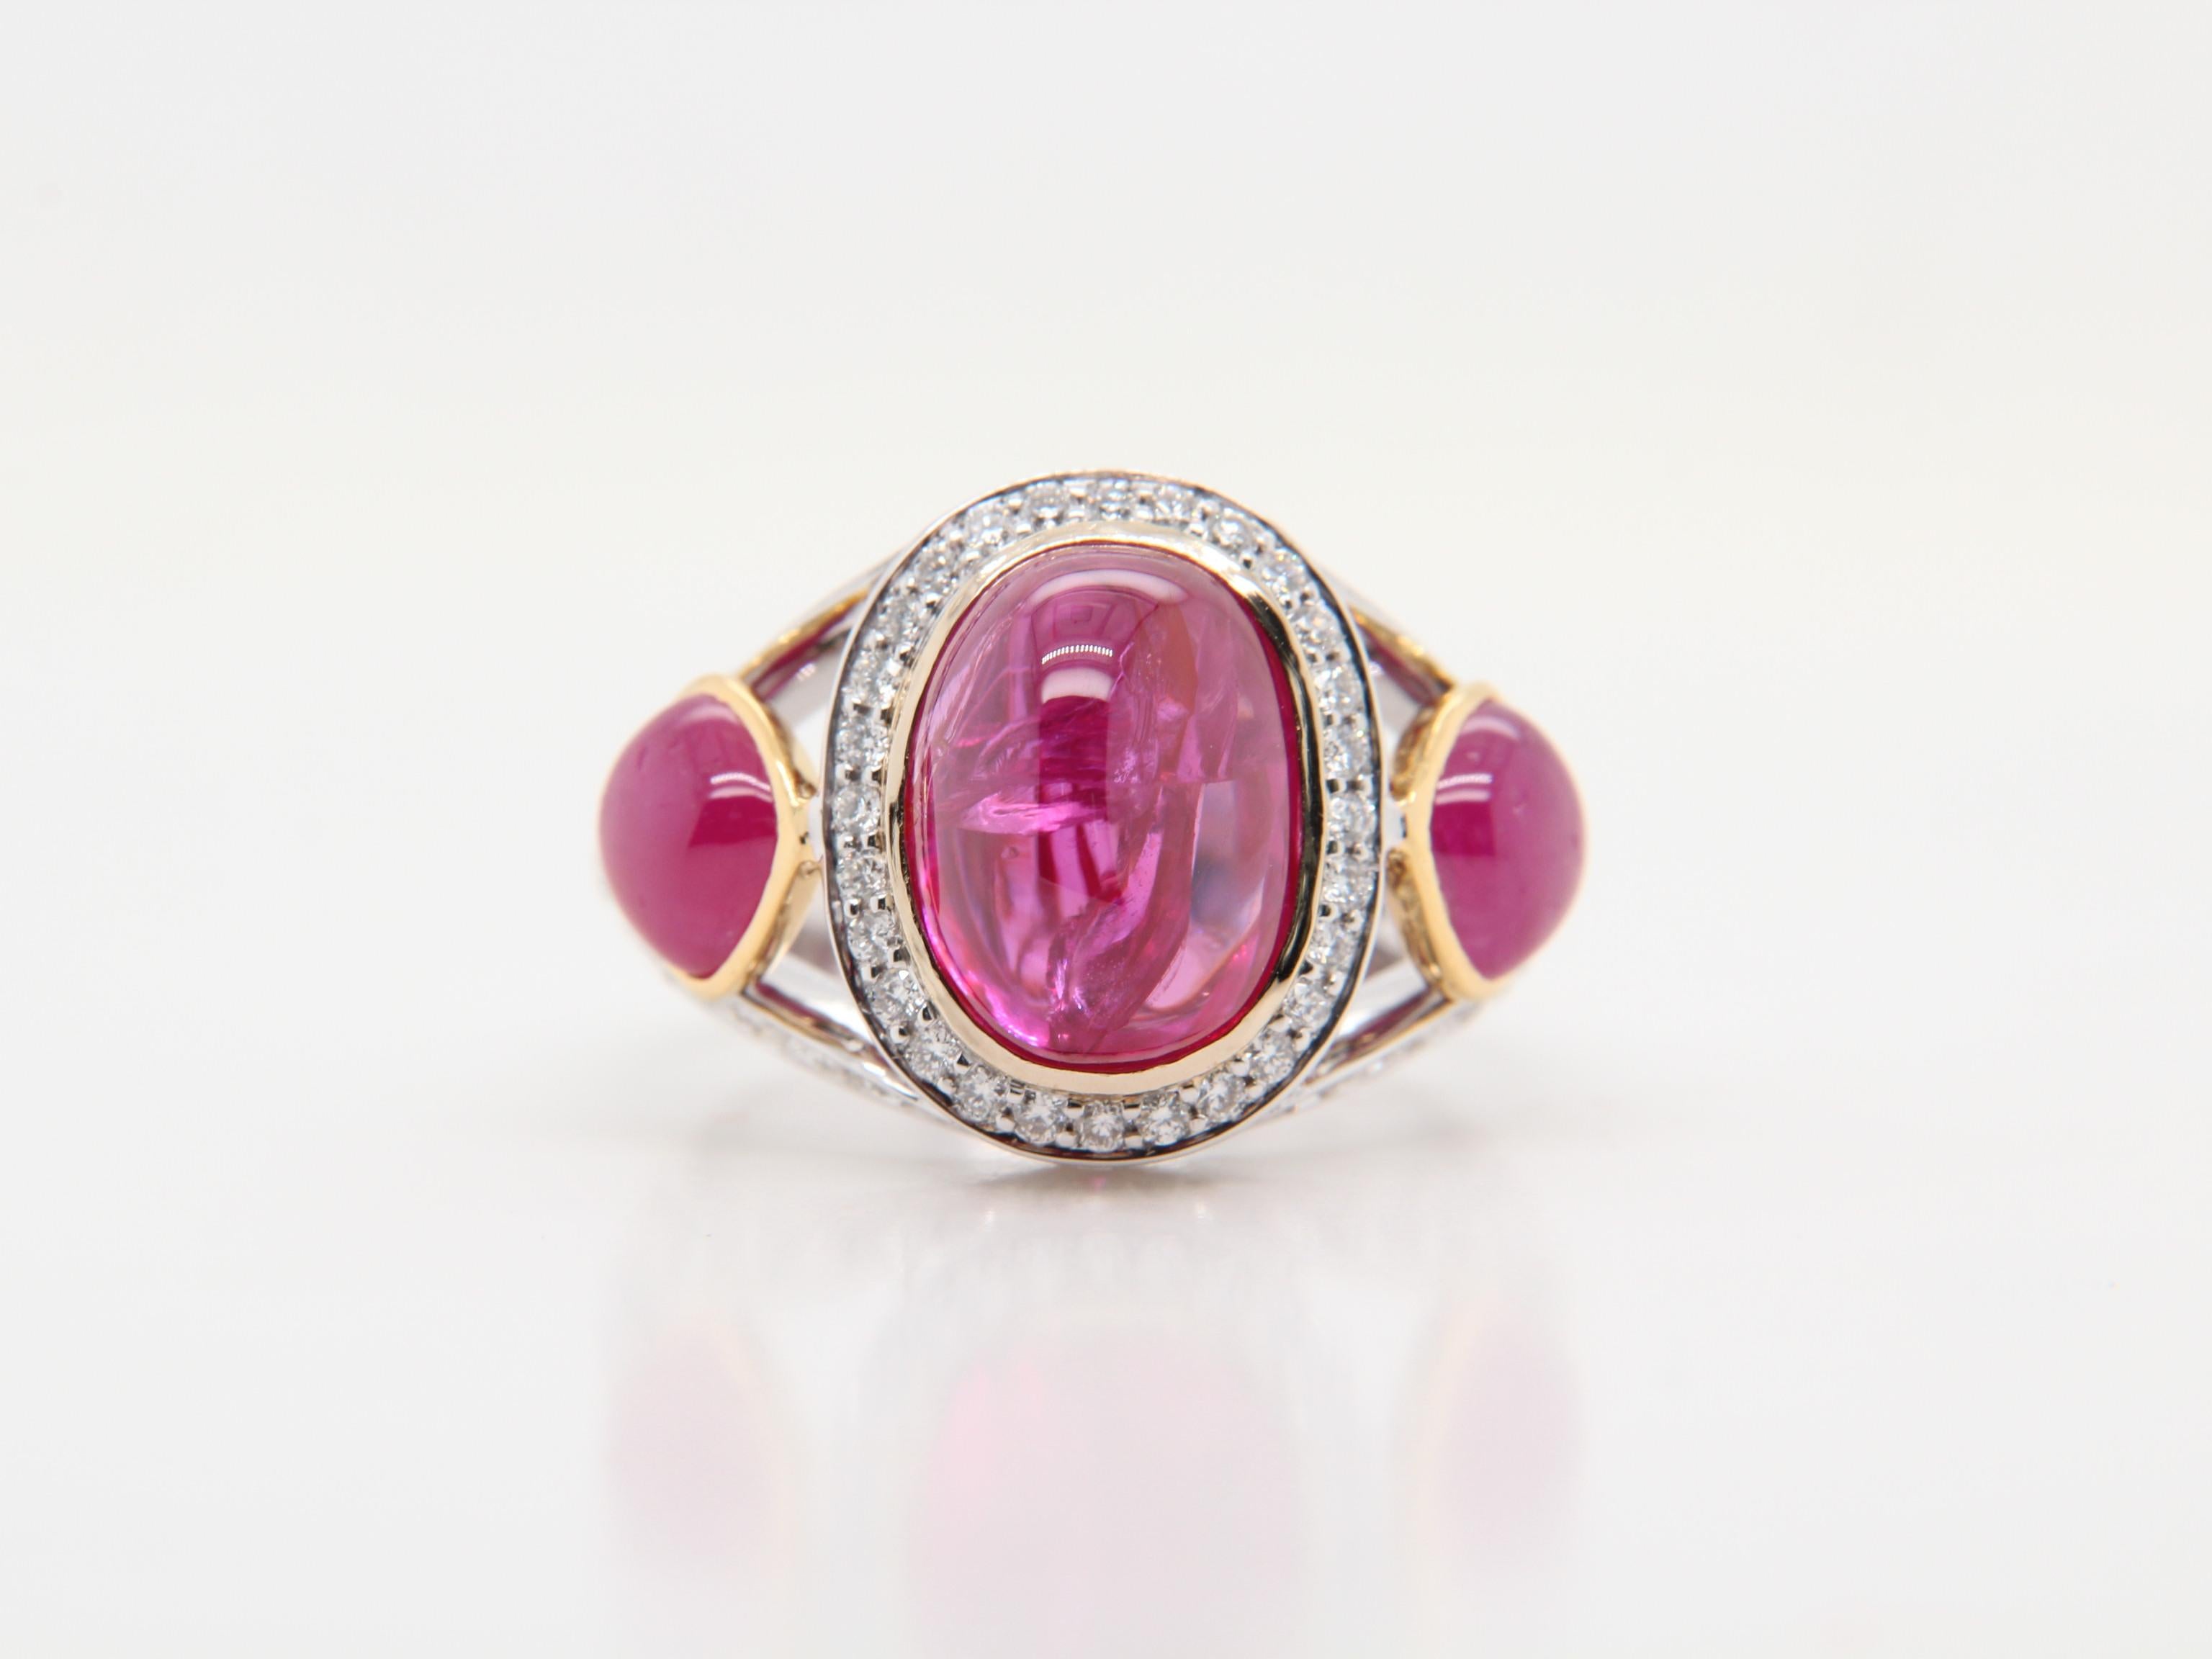 A beautifully crafted cabochon ruby and diamond ring made with 18 karat gold. The total ruby weight is 6.46 carat and is certified by Gem Research Swisslab (GRS) as natural, no heat, and Pinkish-Red from ‘Mogok’. The total diamond weight is 1.34